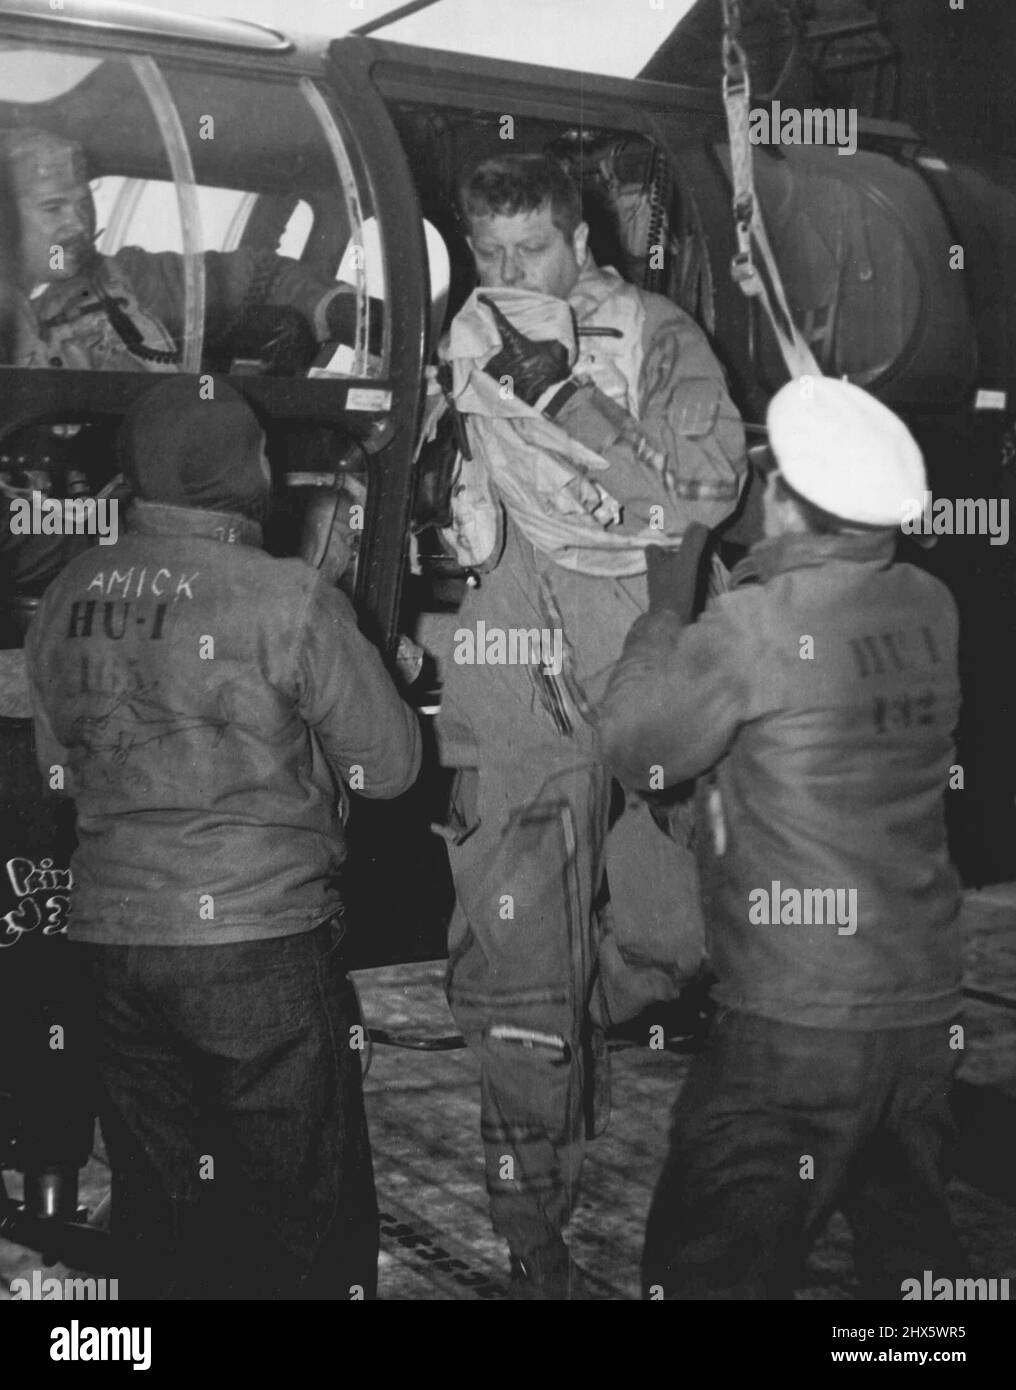 LT. (jg). W.C Windsor of Tyler, Tox., and former Dallas Weekend Warrior  climbs from a helicopter after being rescued from behind enemy lines in  North Korea. LT (jg). Windsor was making his